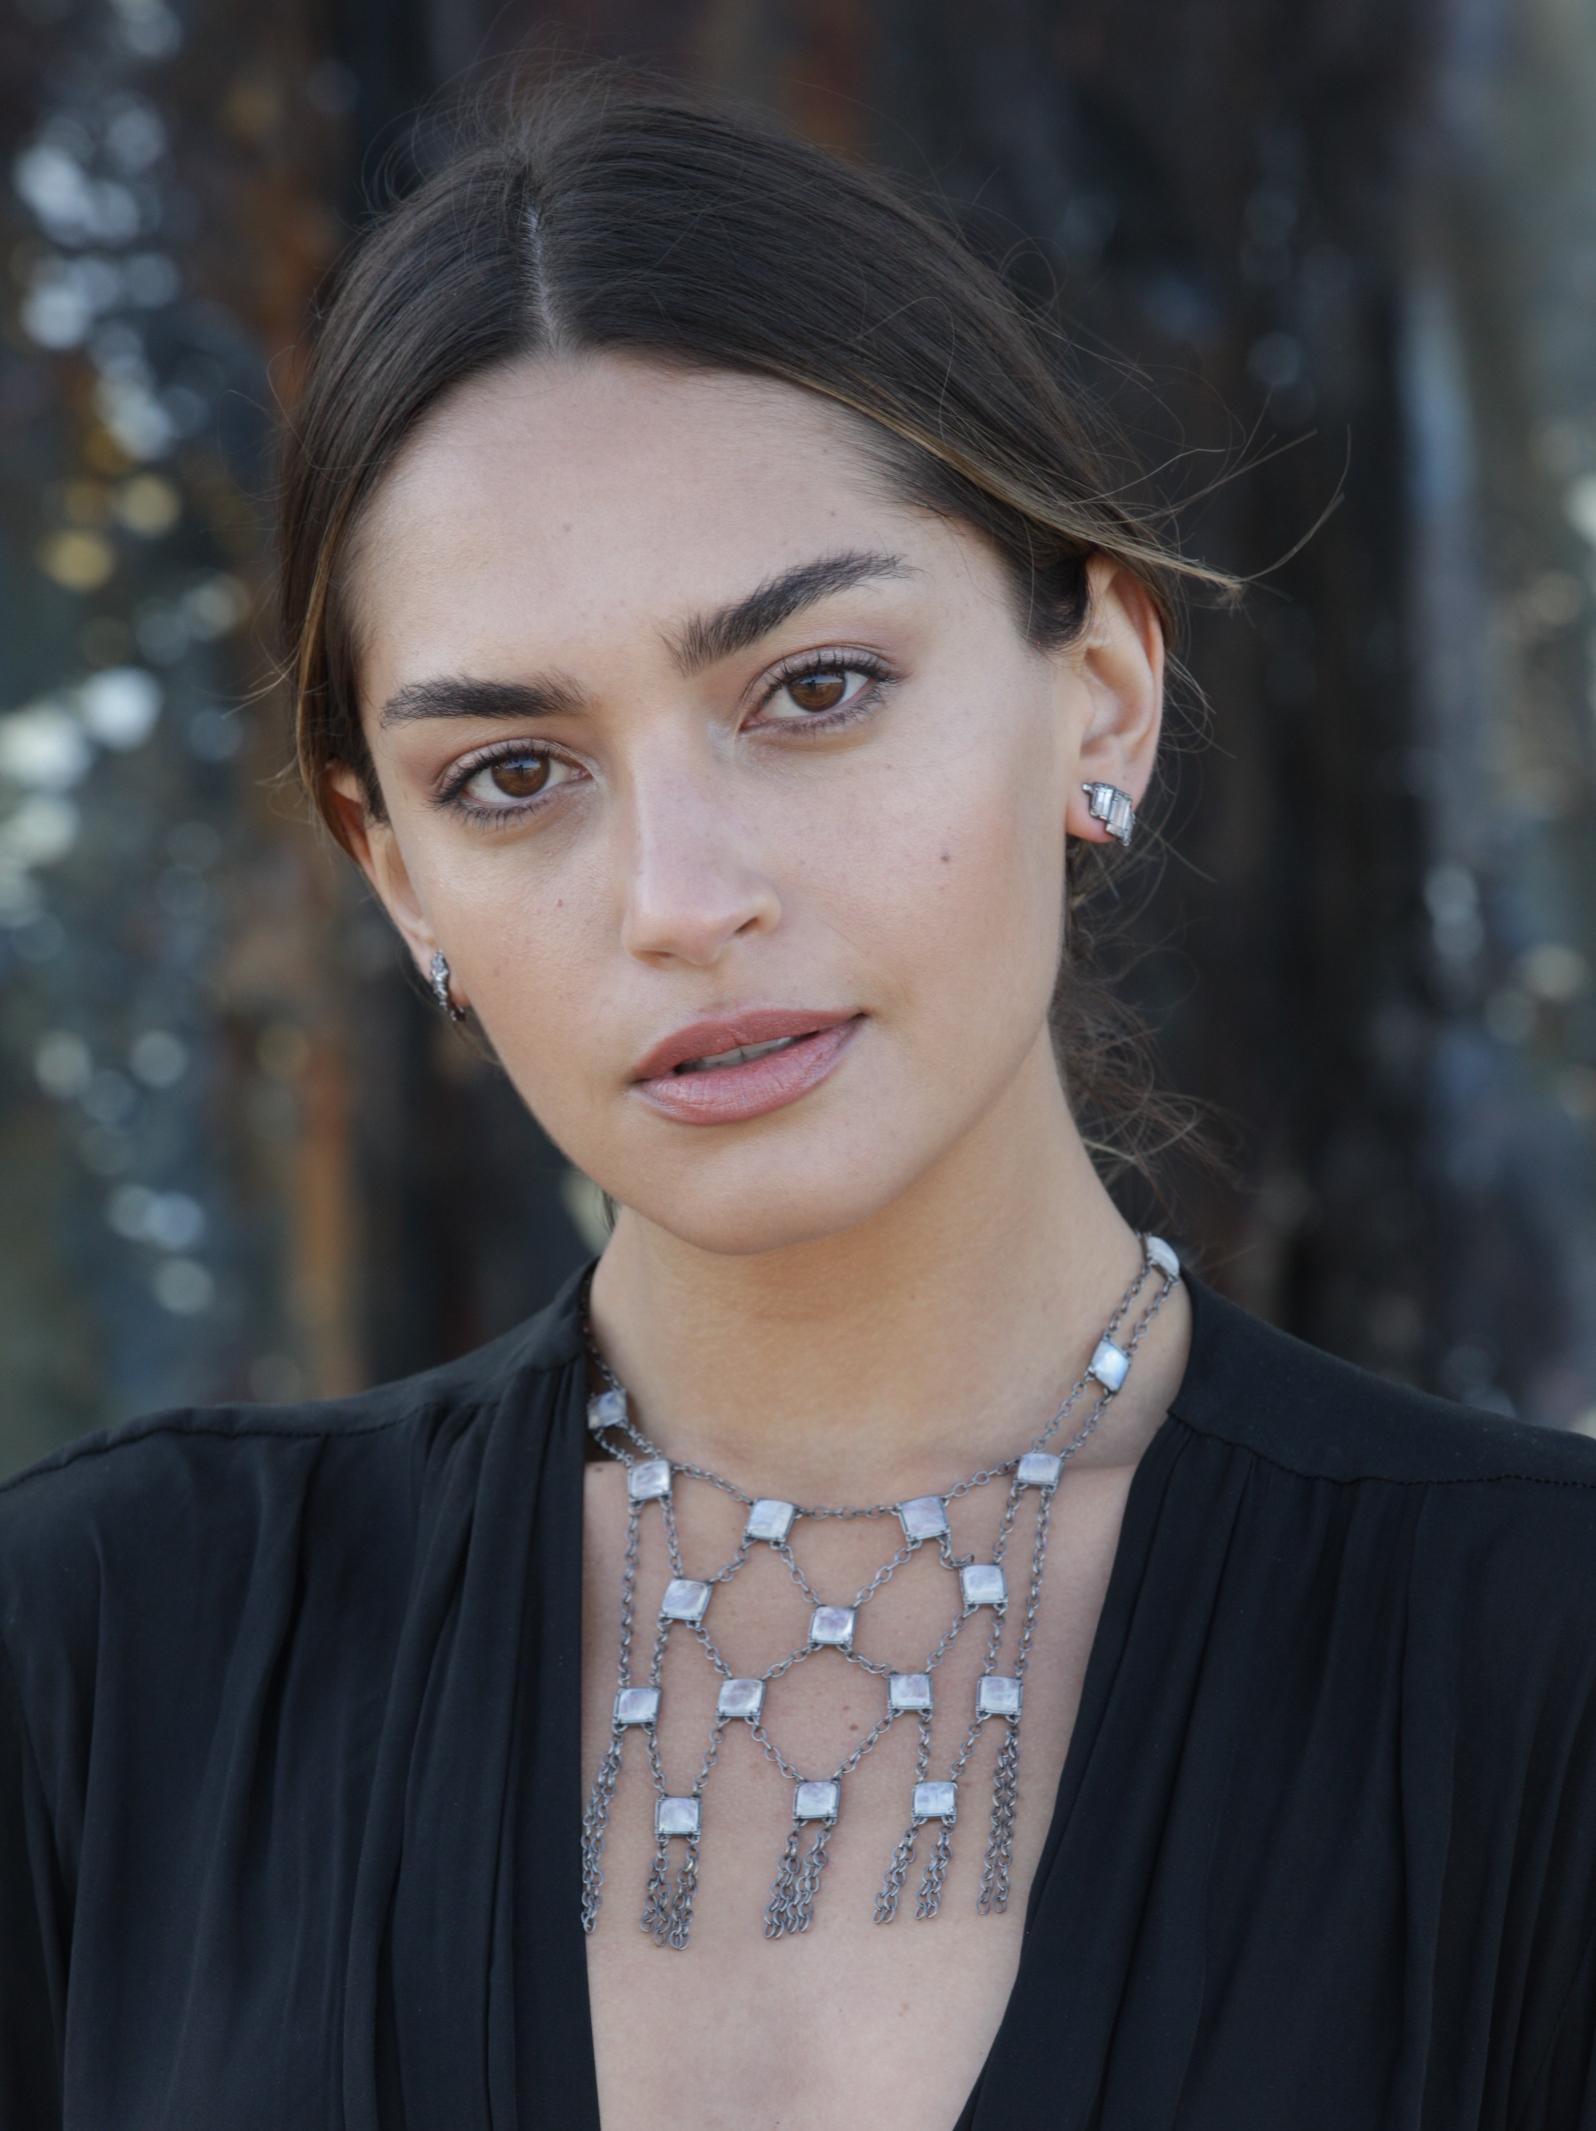 The glowing blue moonstone on open work sterling silver  mesh chain is designed strategically to function casually or as a bold standout.  
Whether on the skin or over a garment, this alluring yellow gold bib necklace is a versatile layer added to a